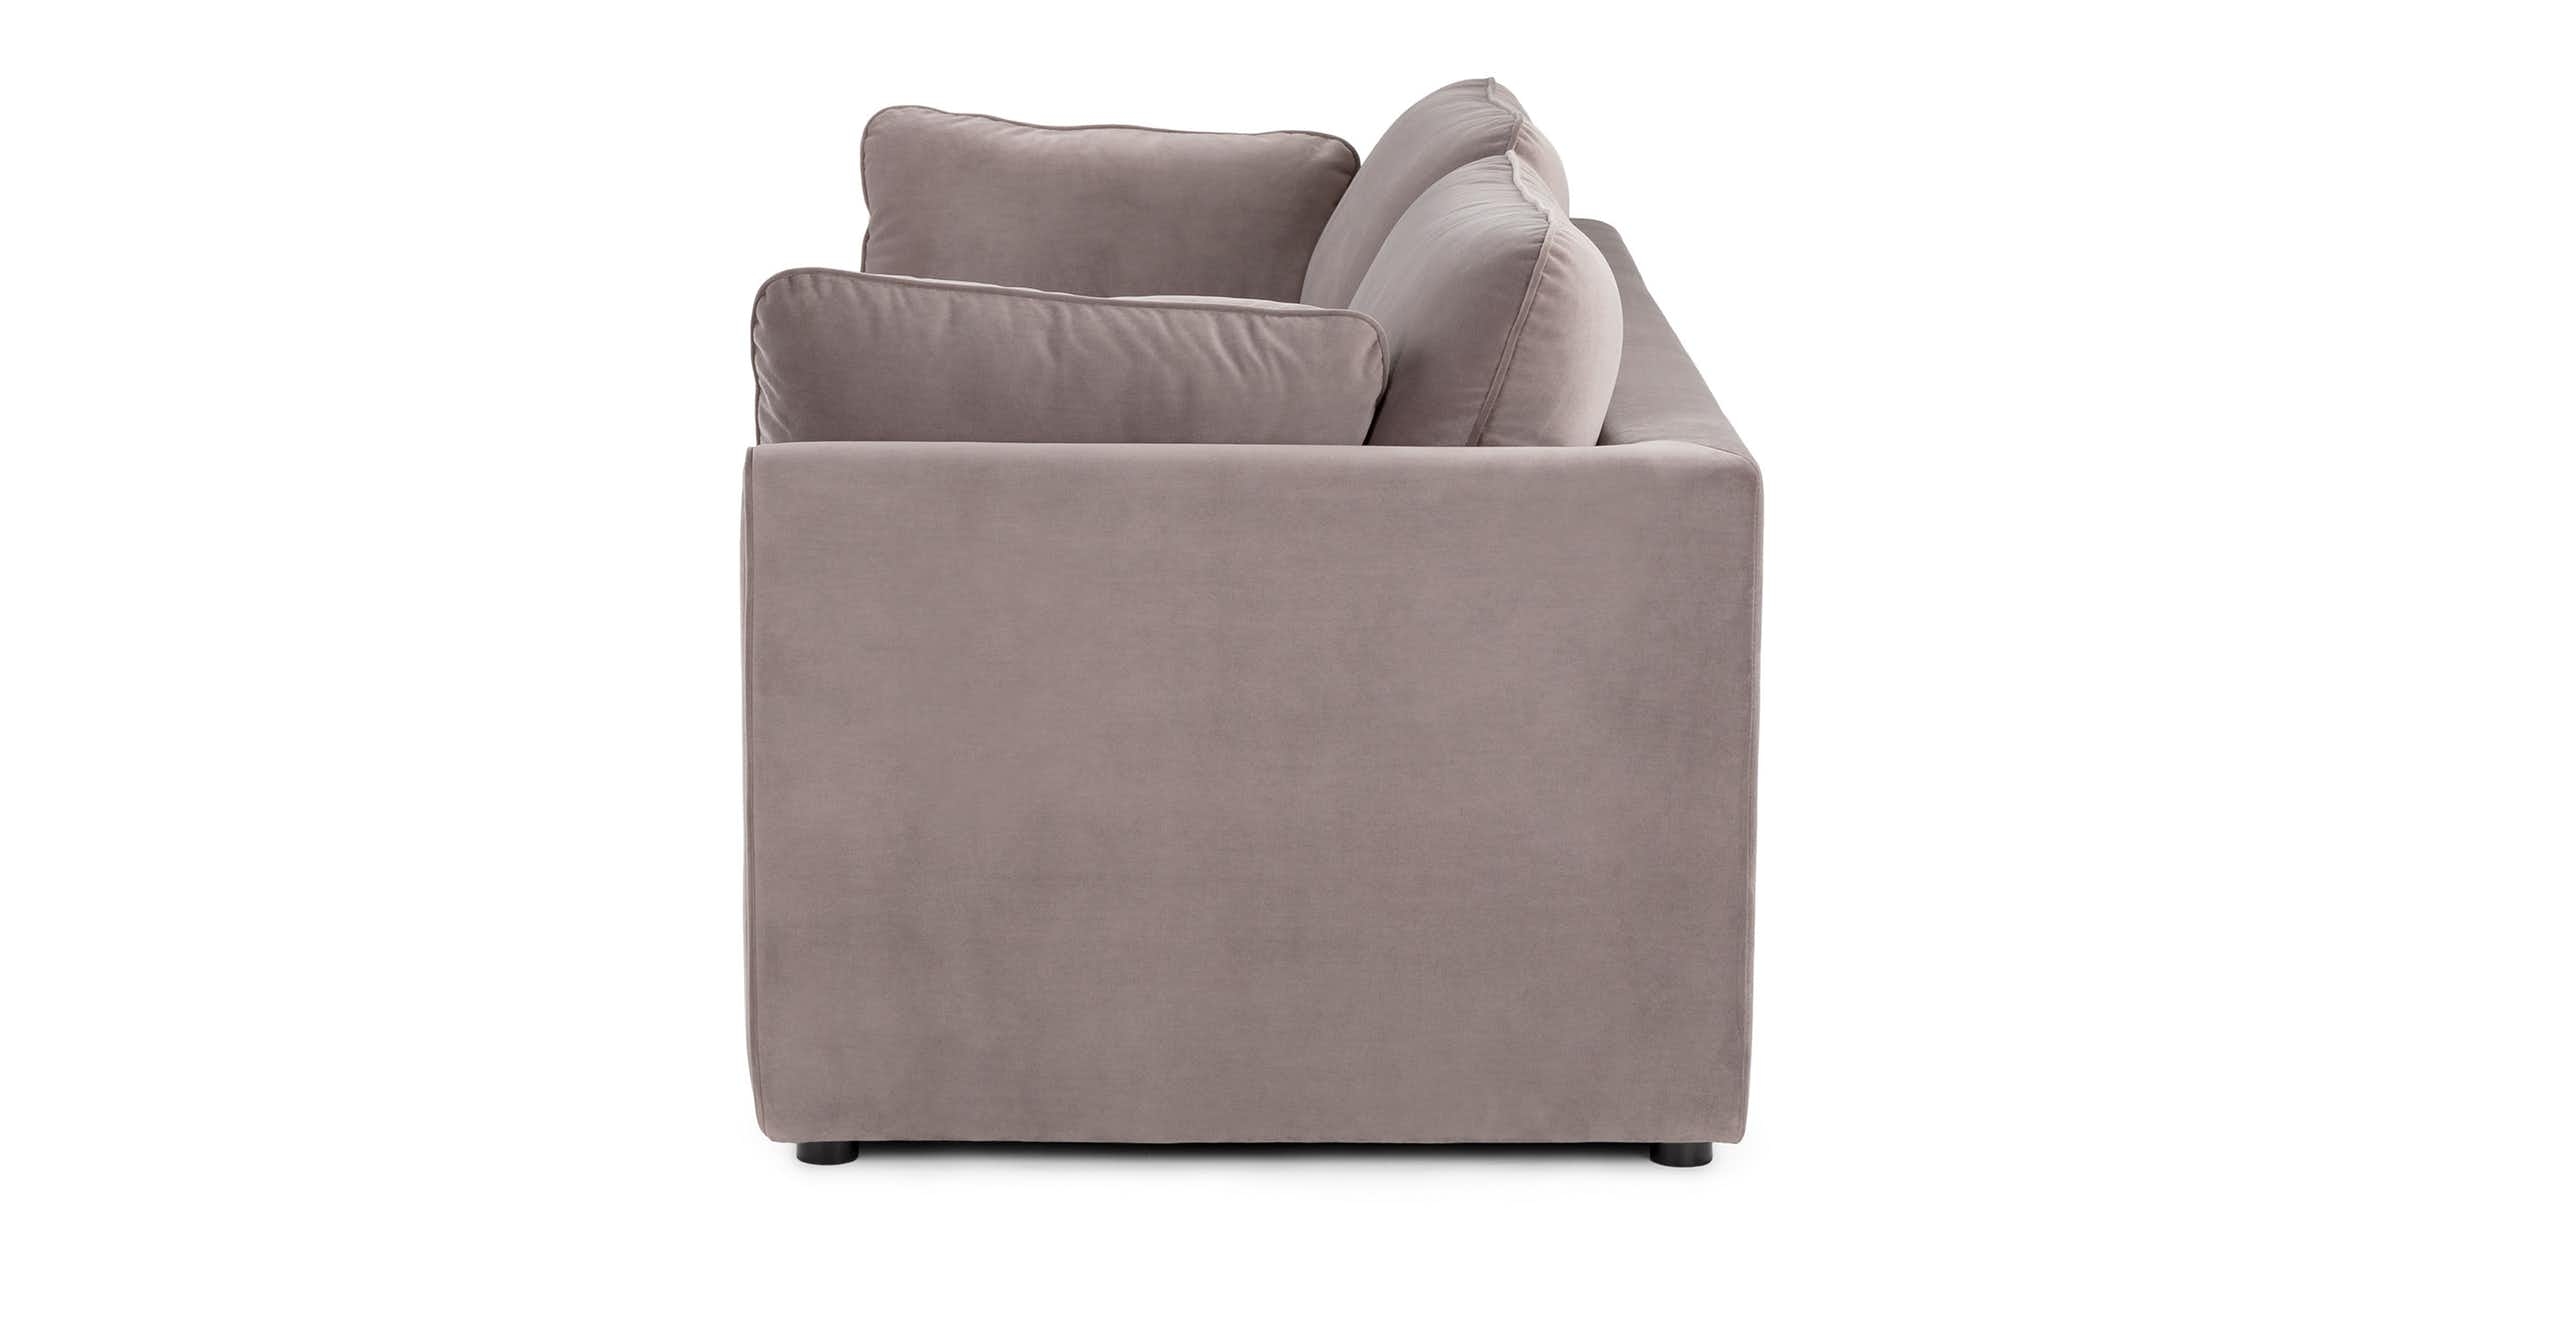 Oneira Dream Taupe Sofa Bed - Image 2